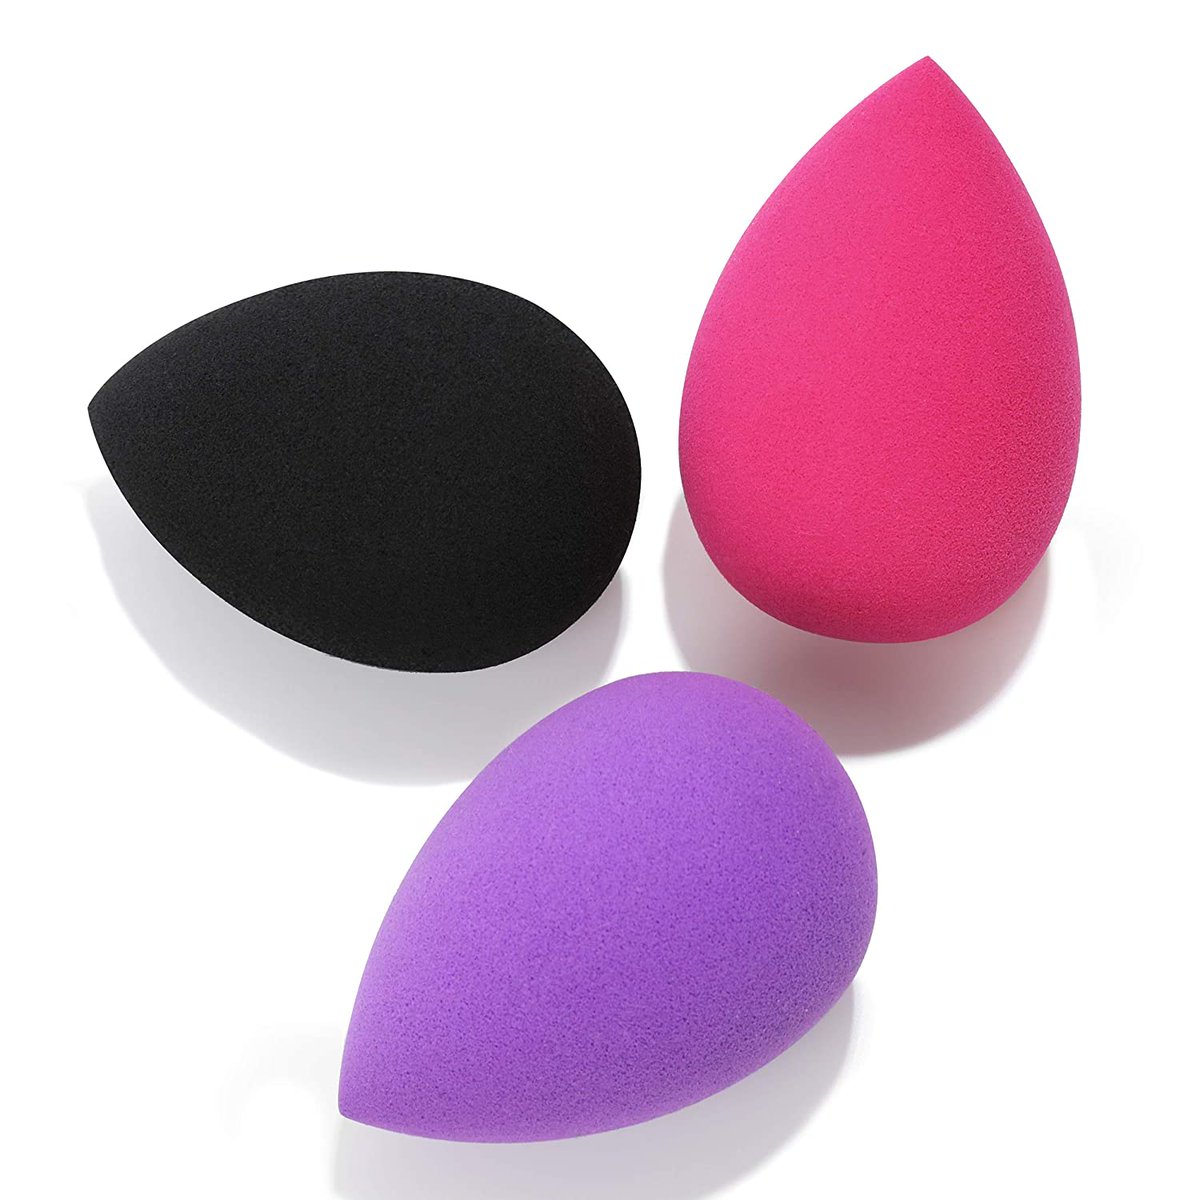  Limited Time Deals!

3-pack Makeup Sponges for as low as $3.49!

   
Link0|B08G86DFF5&ref_=as_li_ss_tl&tag=crazydeals02-20 